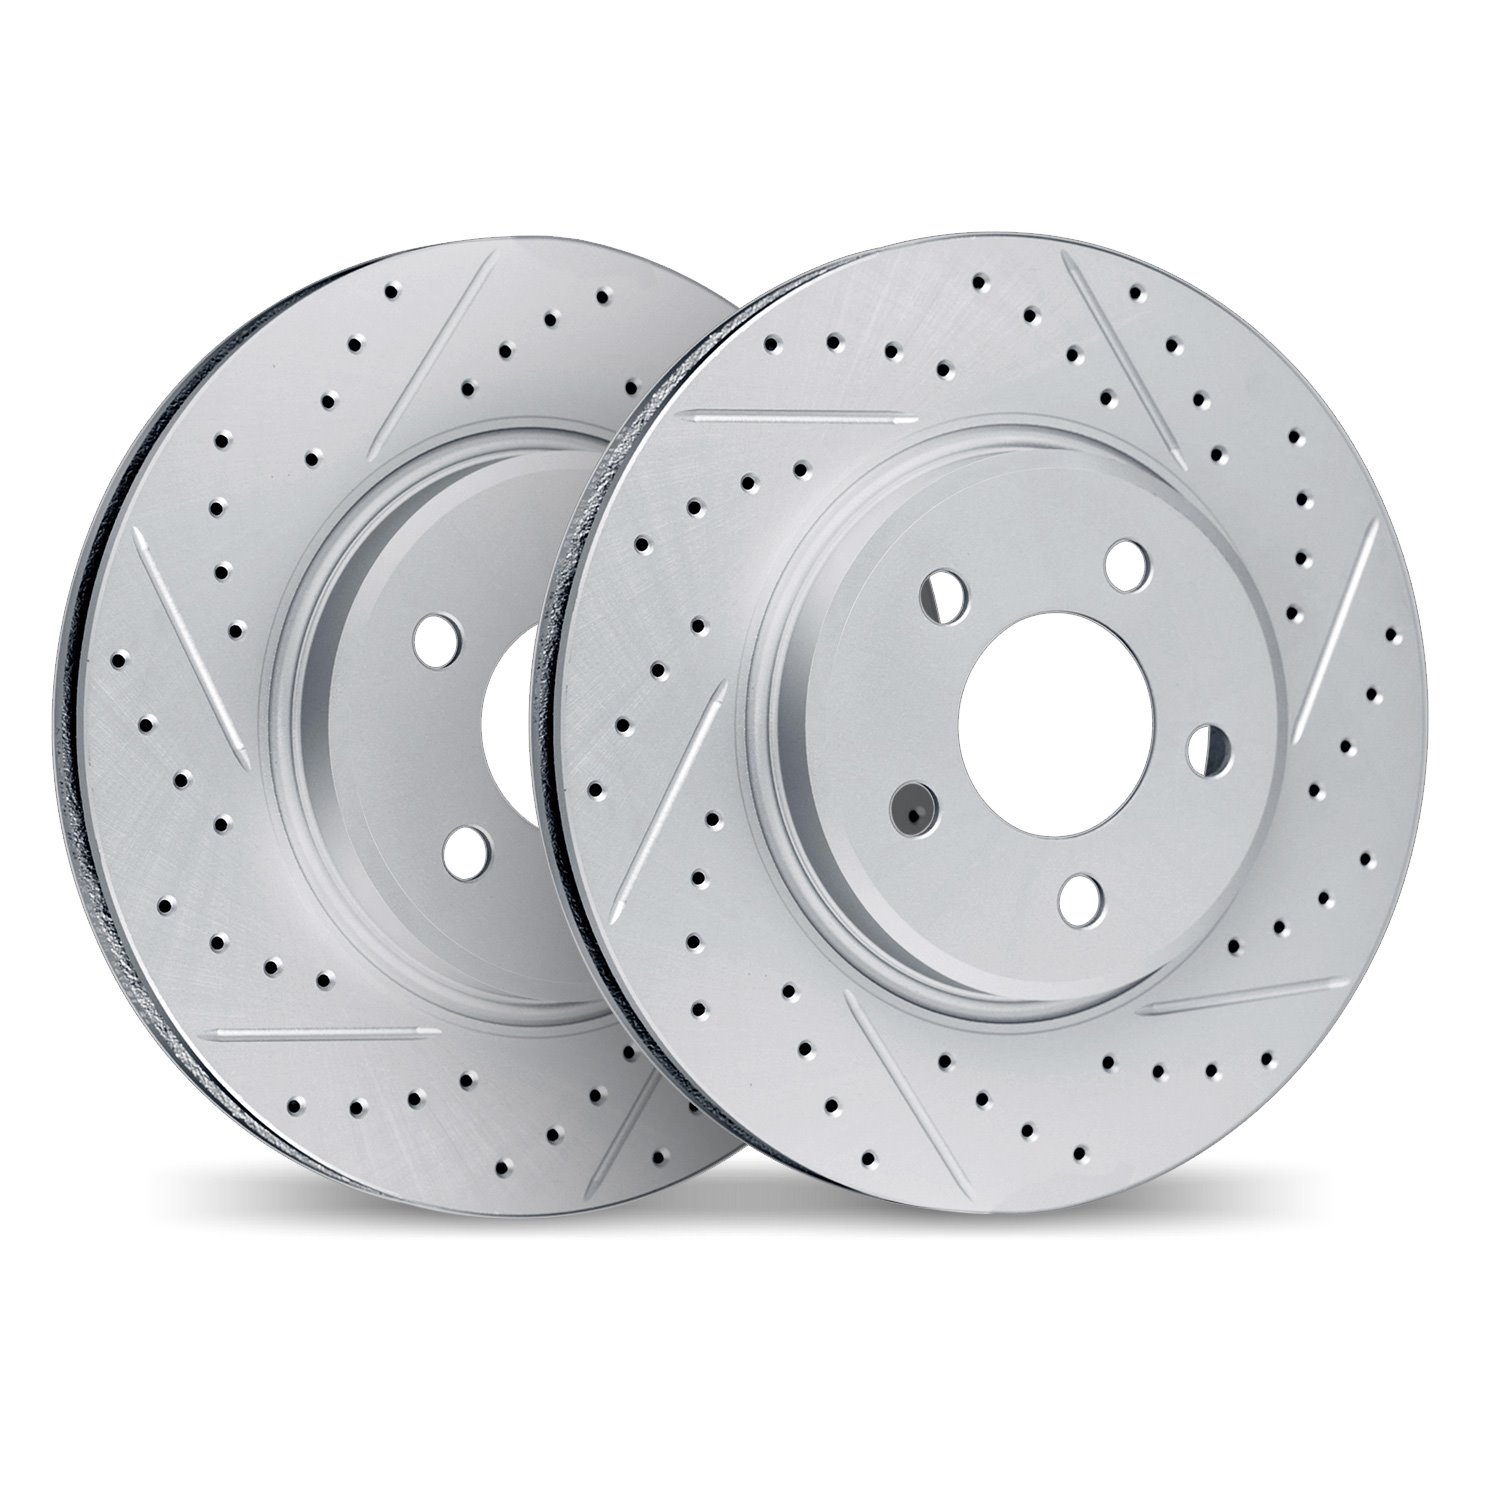 2002-59024 Geoperformance Drilled/Slotted Brake Rotors, Fits Select Acura/Honda, Position: Front